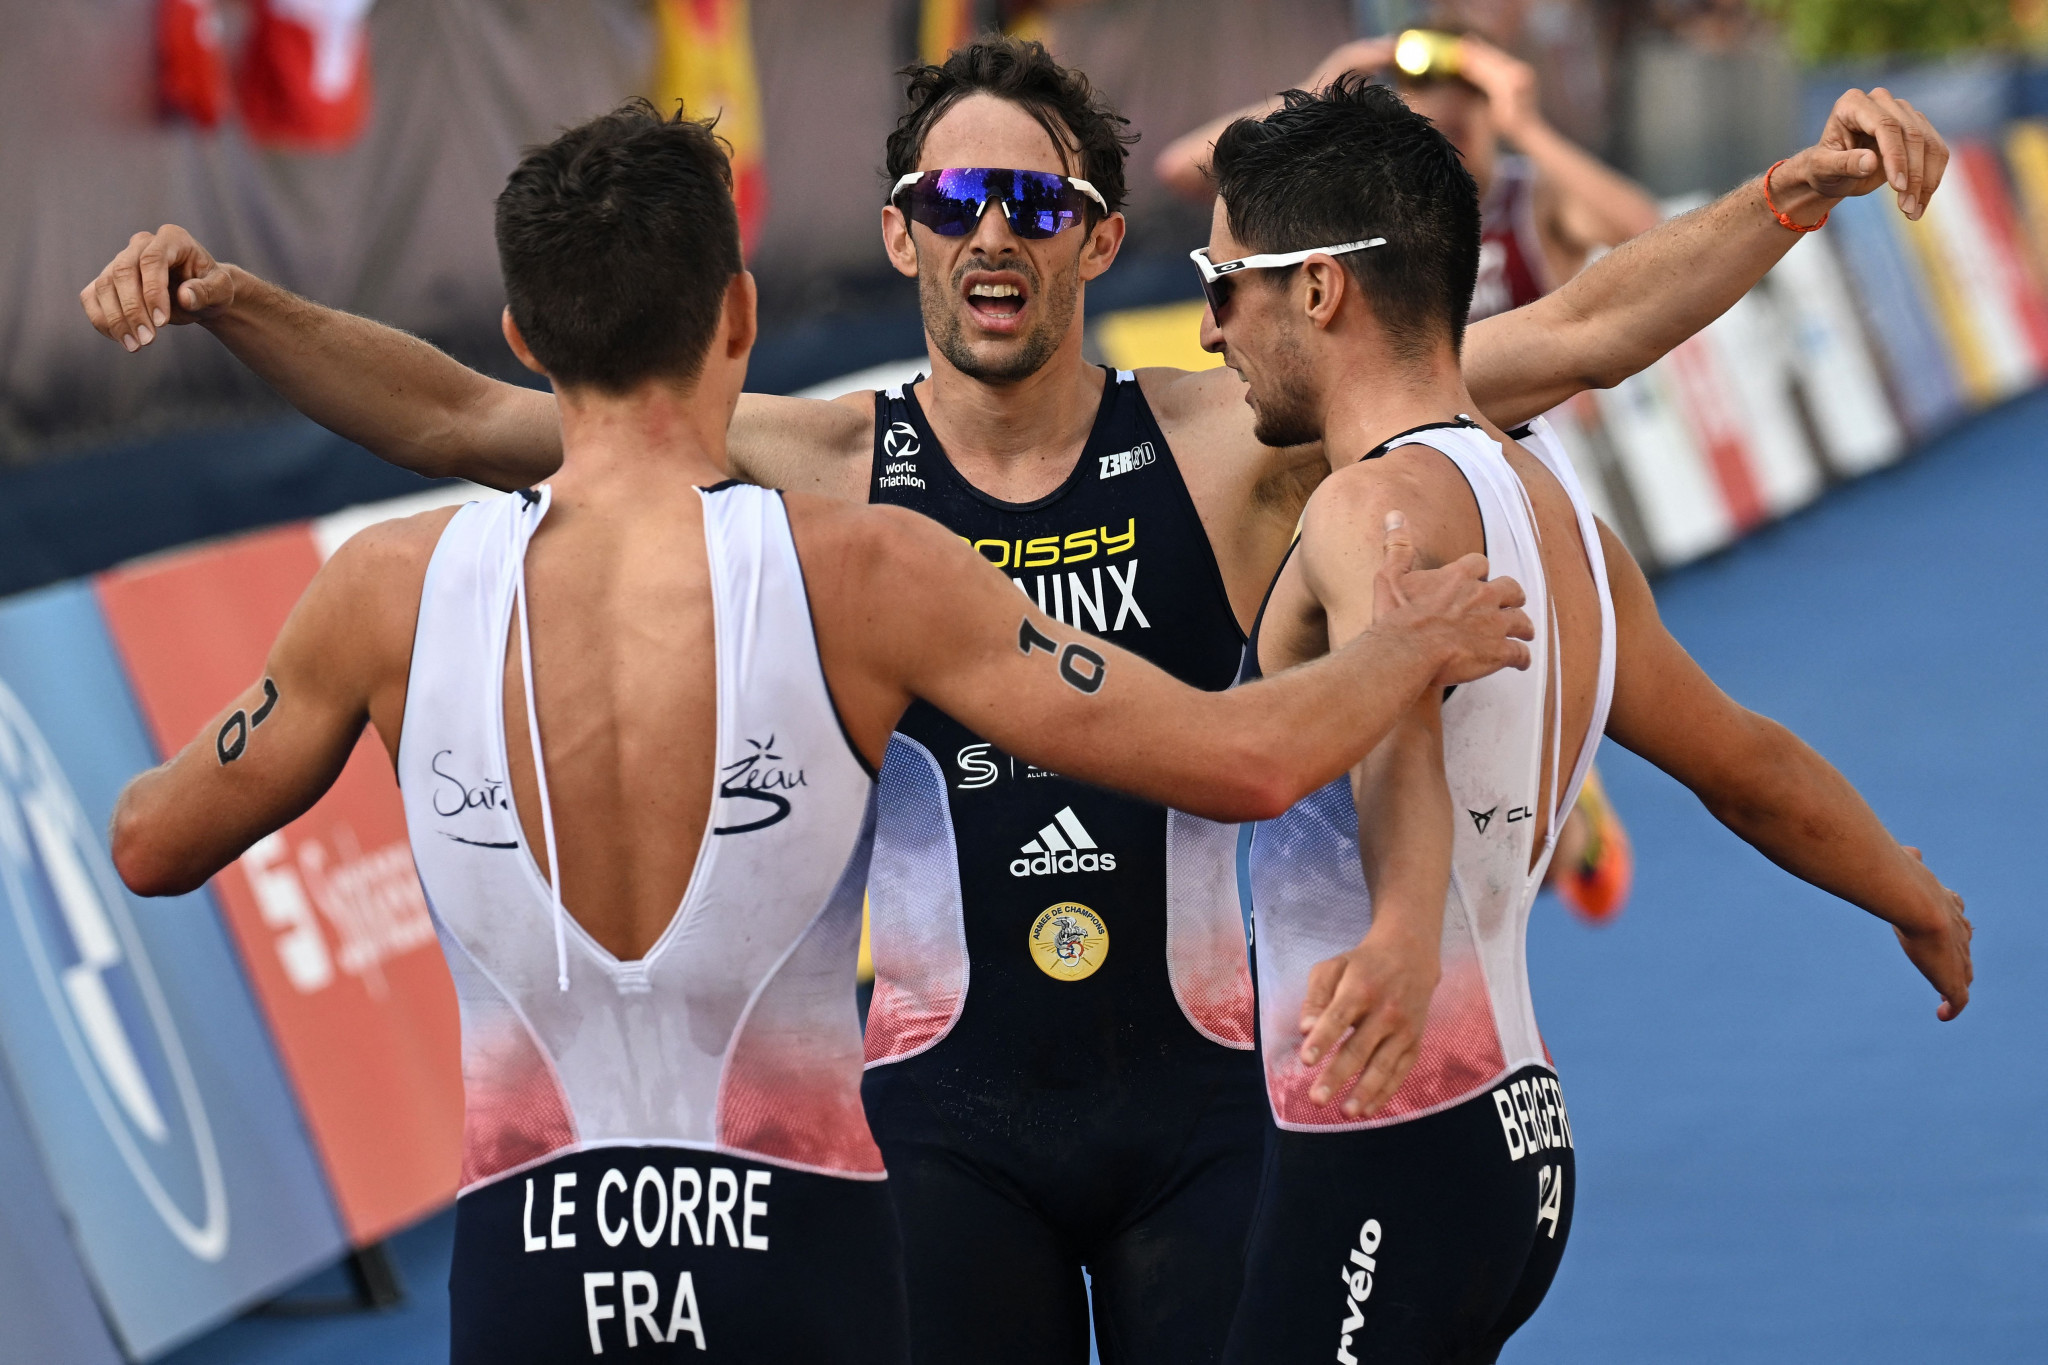 France claimed a clean sweep in the men’s triathlon race ©Getty Images